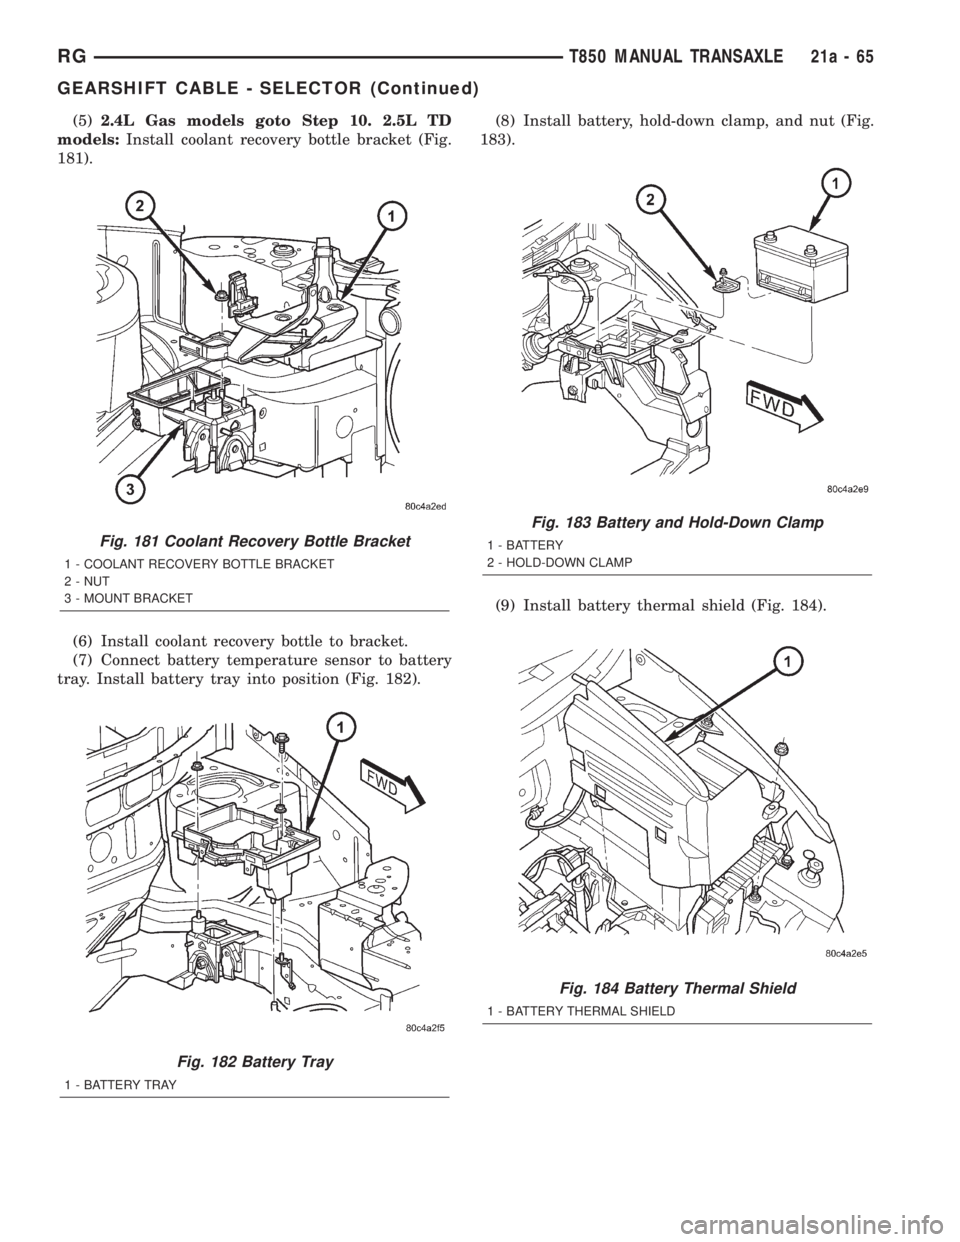 CHRYSLER VOYAGER 2001  Service Manual (5)2.4L Gas models goto Step 10. 2.5L TD
models:Install coolant recovery bottle bracket (Fig.
181).
(6) Install coolant recovery bottle to bracket.
(7) Connect battery temperature sensor to battery
tr